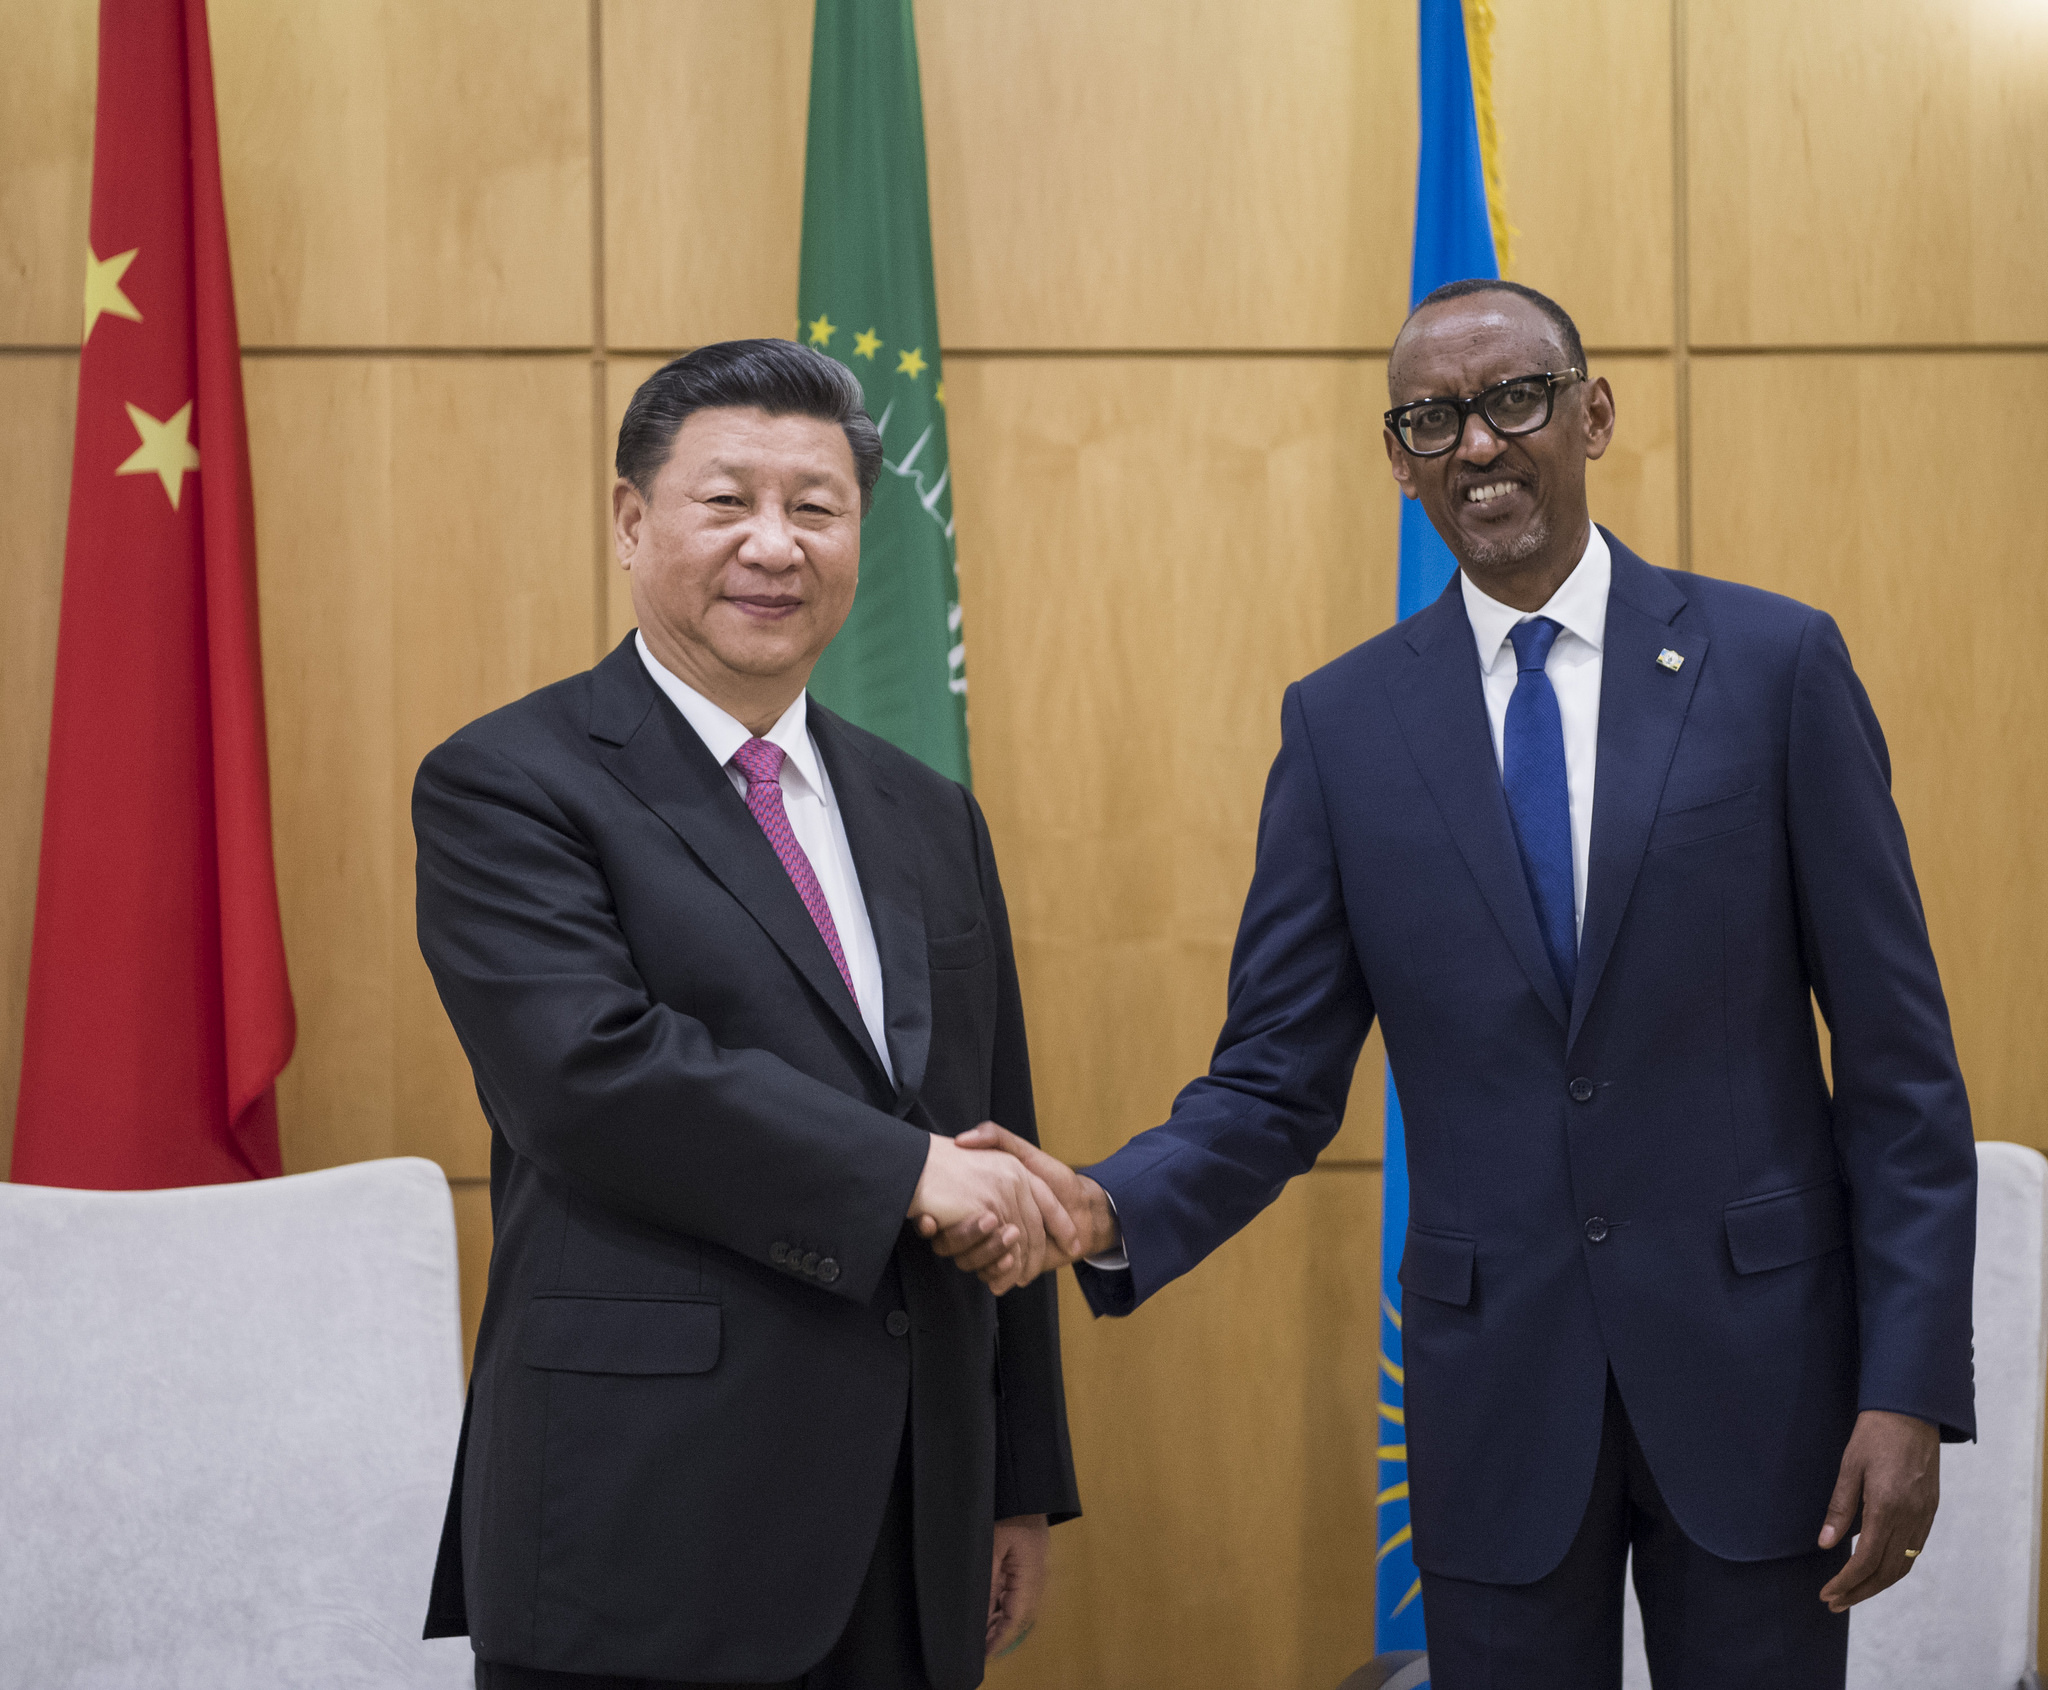 President Kagame (right) welcoming president Jinping during his visit in Rwanda in July 2018